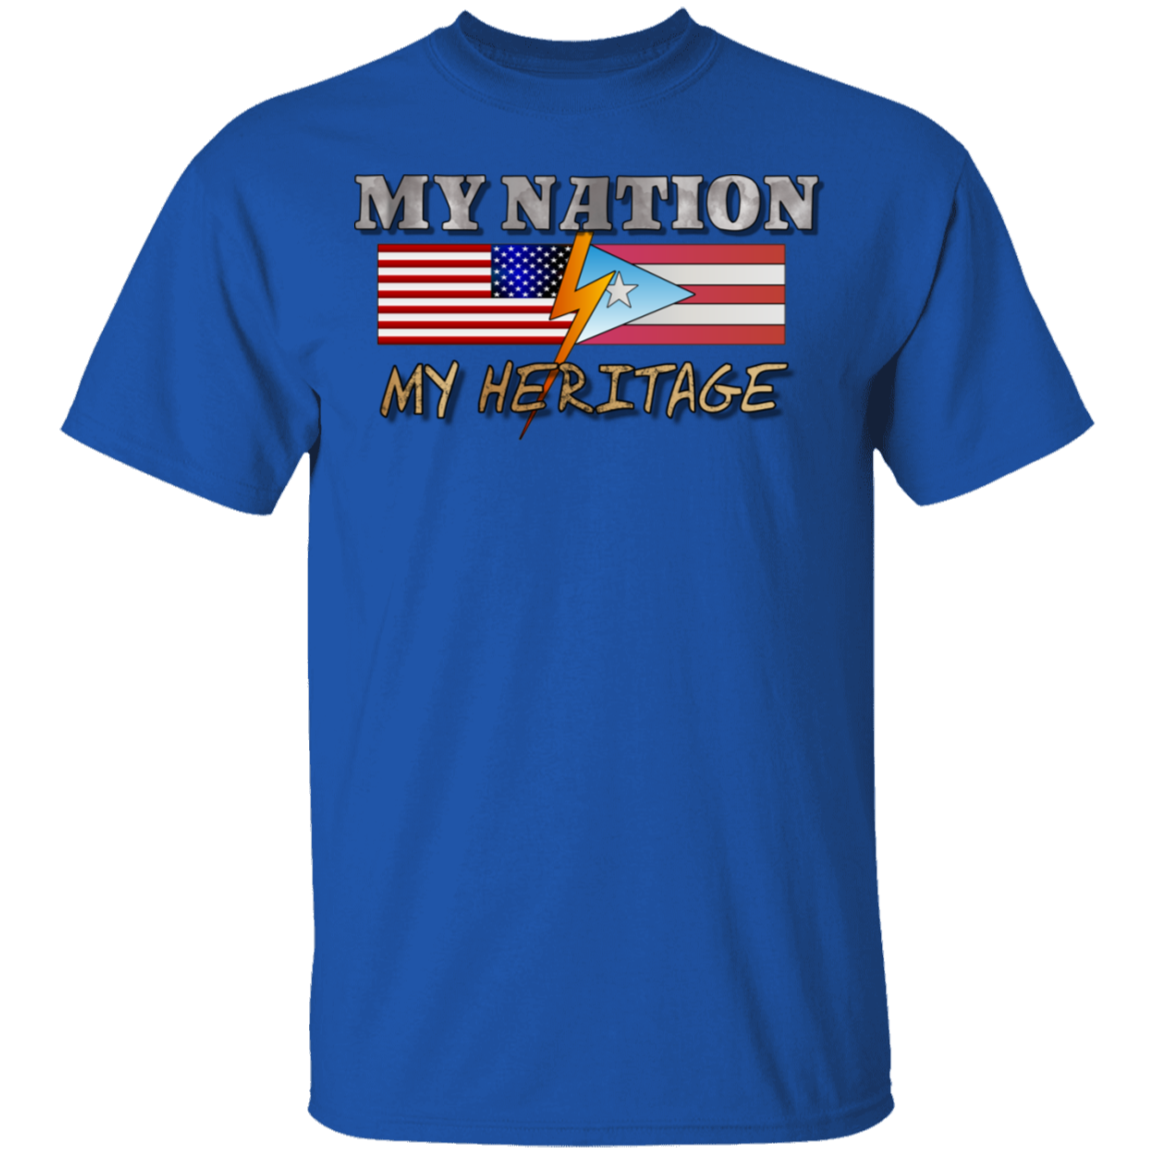 MY Nation MY Heritage 5.3 oz. T-Shirt - Puerto Rican Pride